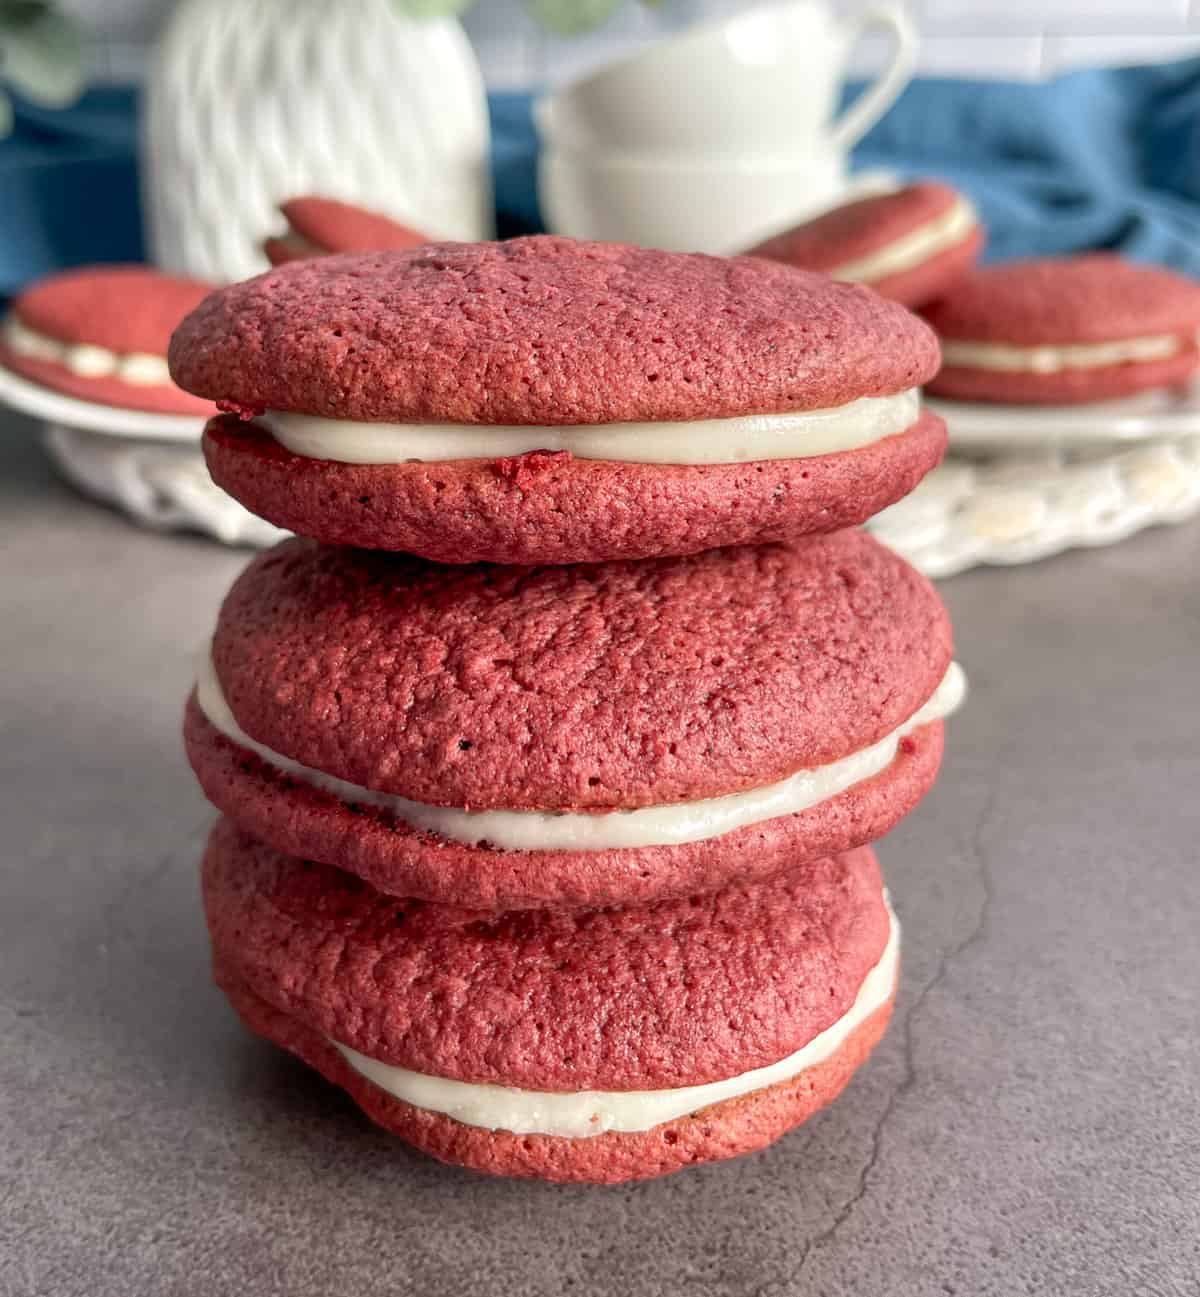 A stack of red velvet whoopie pies made from cake mix 